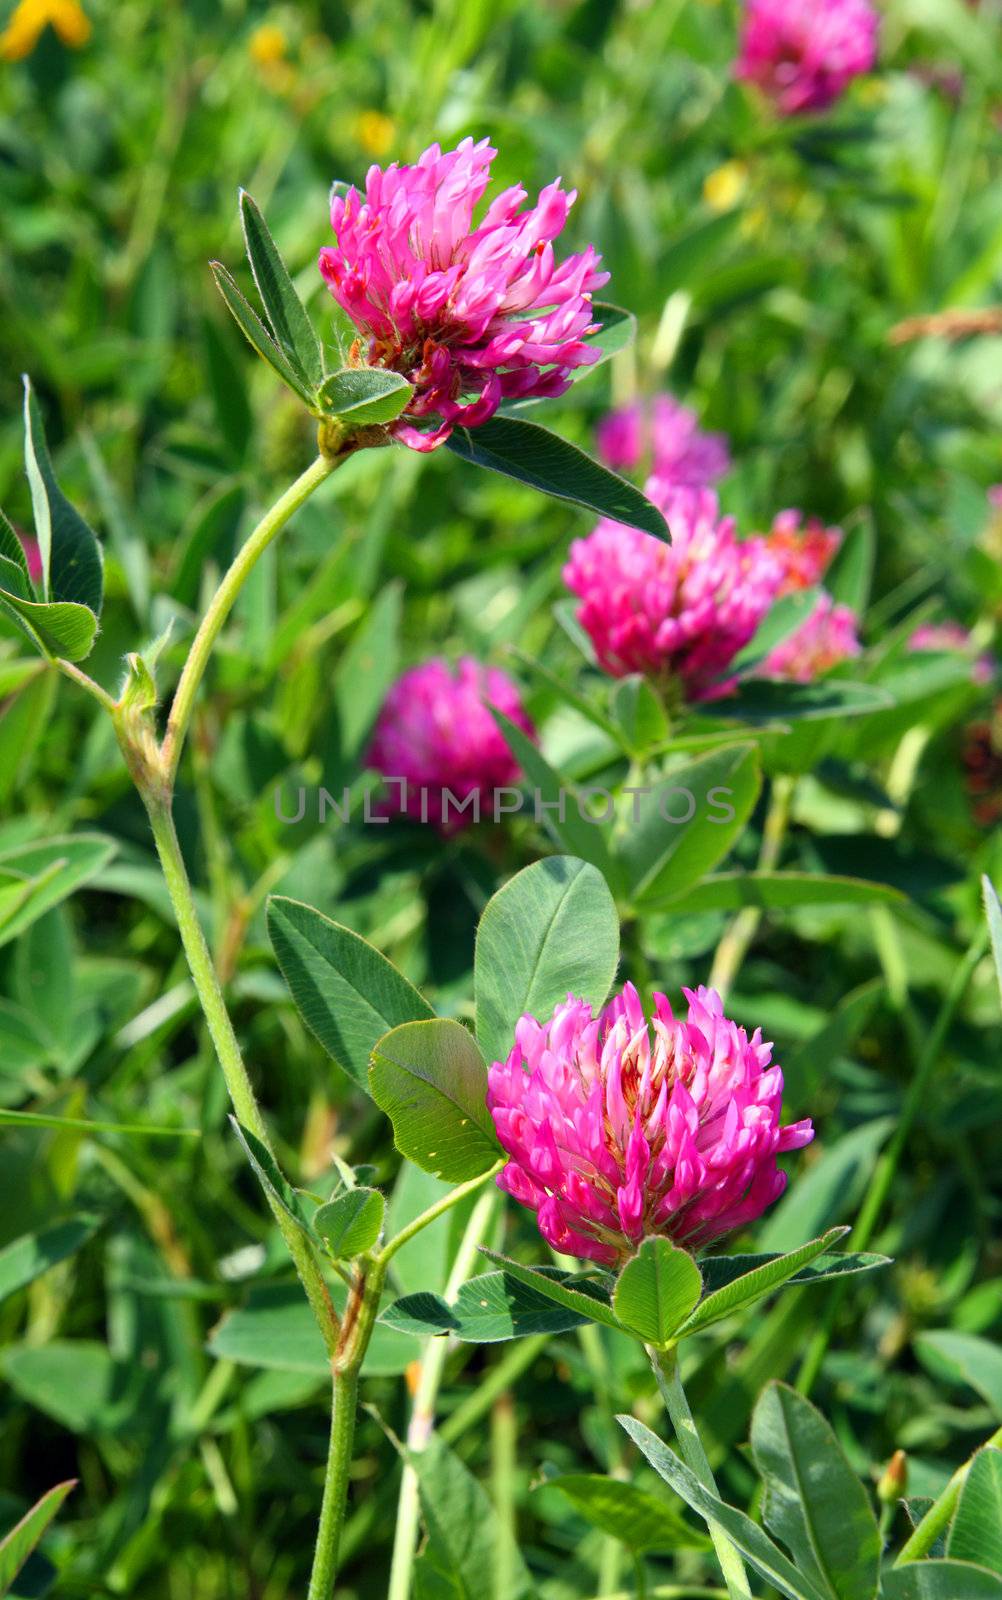 clover flowers by Mikko